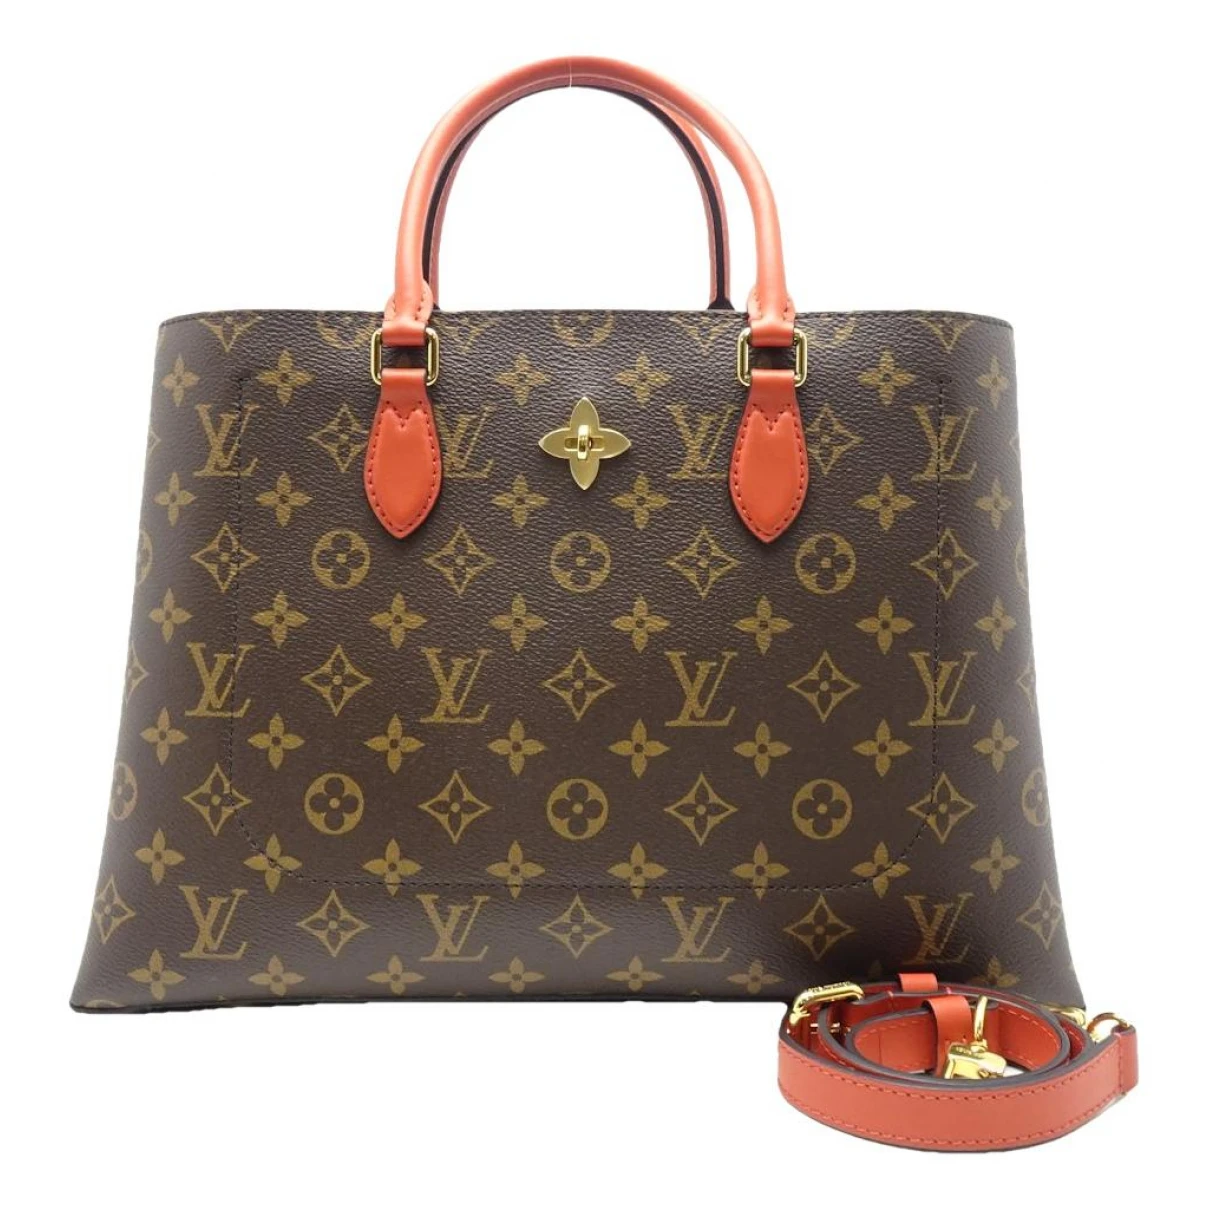 bags Louis Vuitton handbags Flower Tote for Female Leather. Used condition